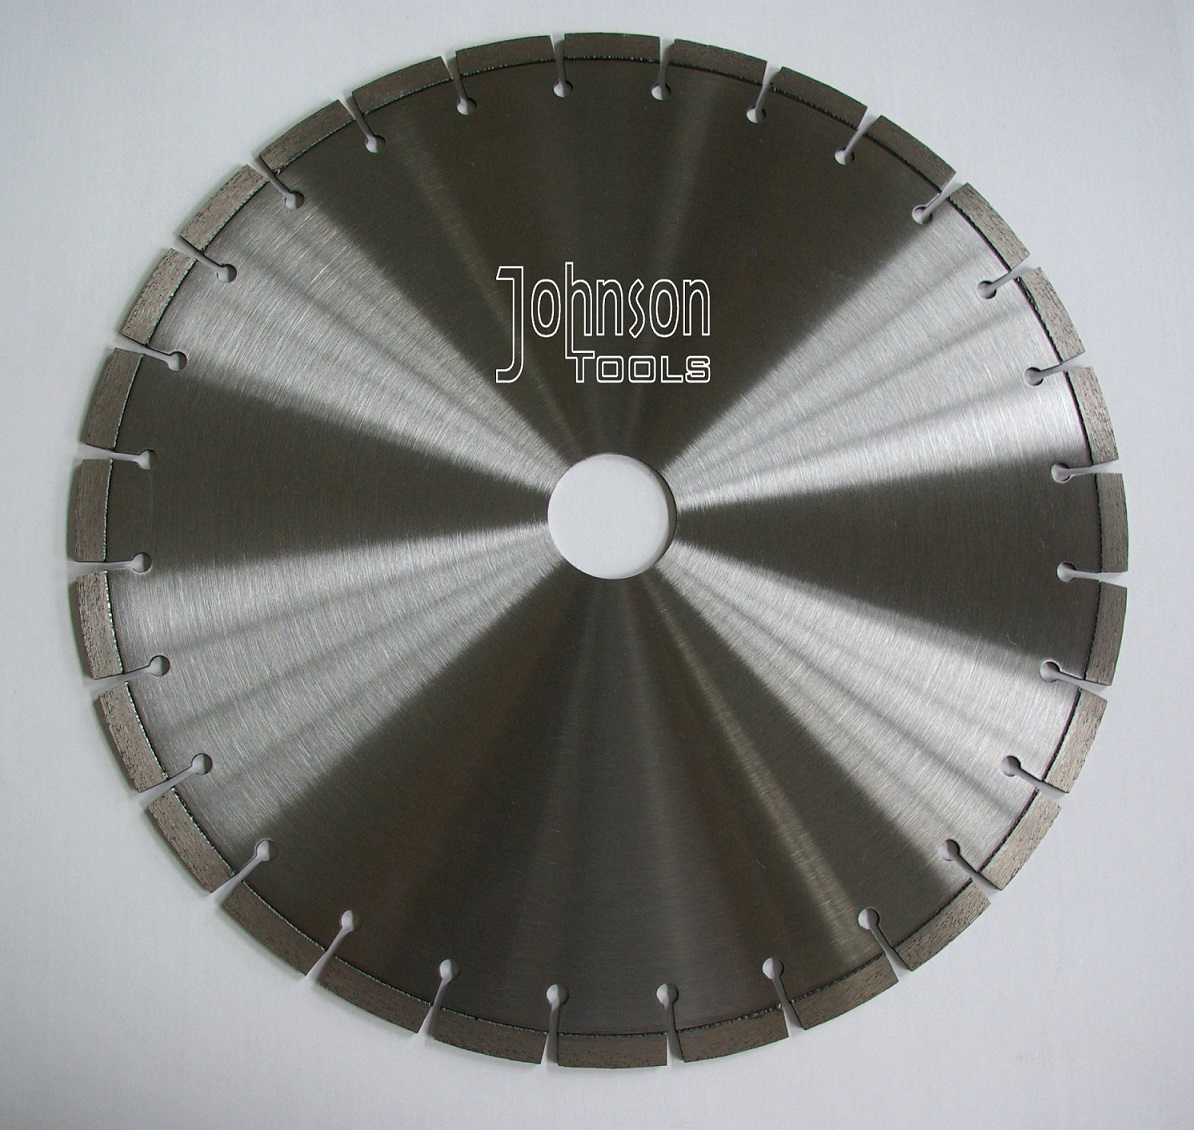 400mm Laser Welded Diamond Granite Saw Blades for Stone Cutting